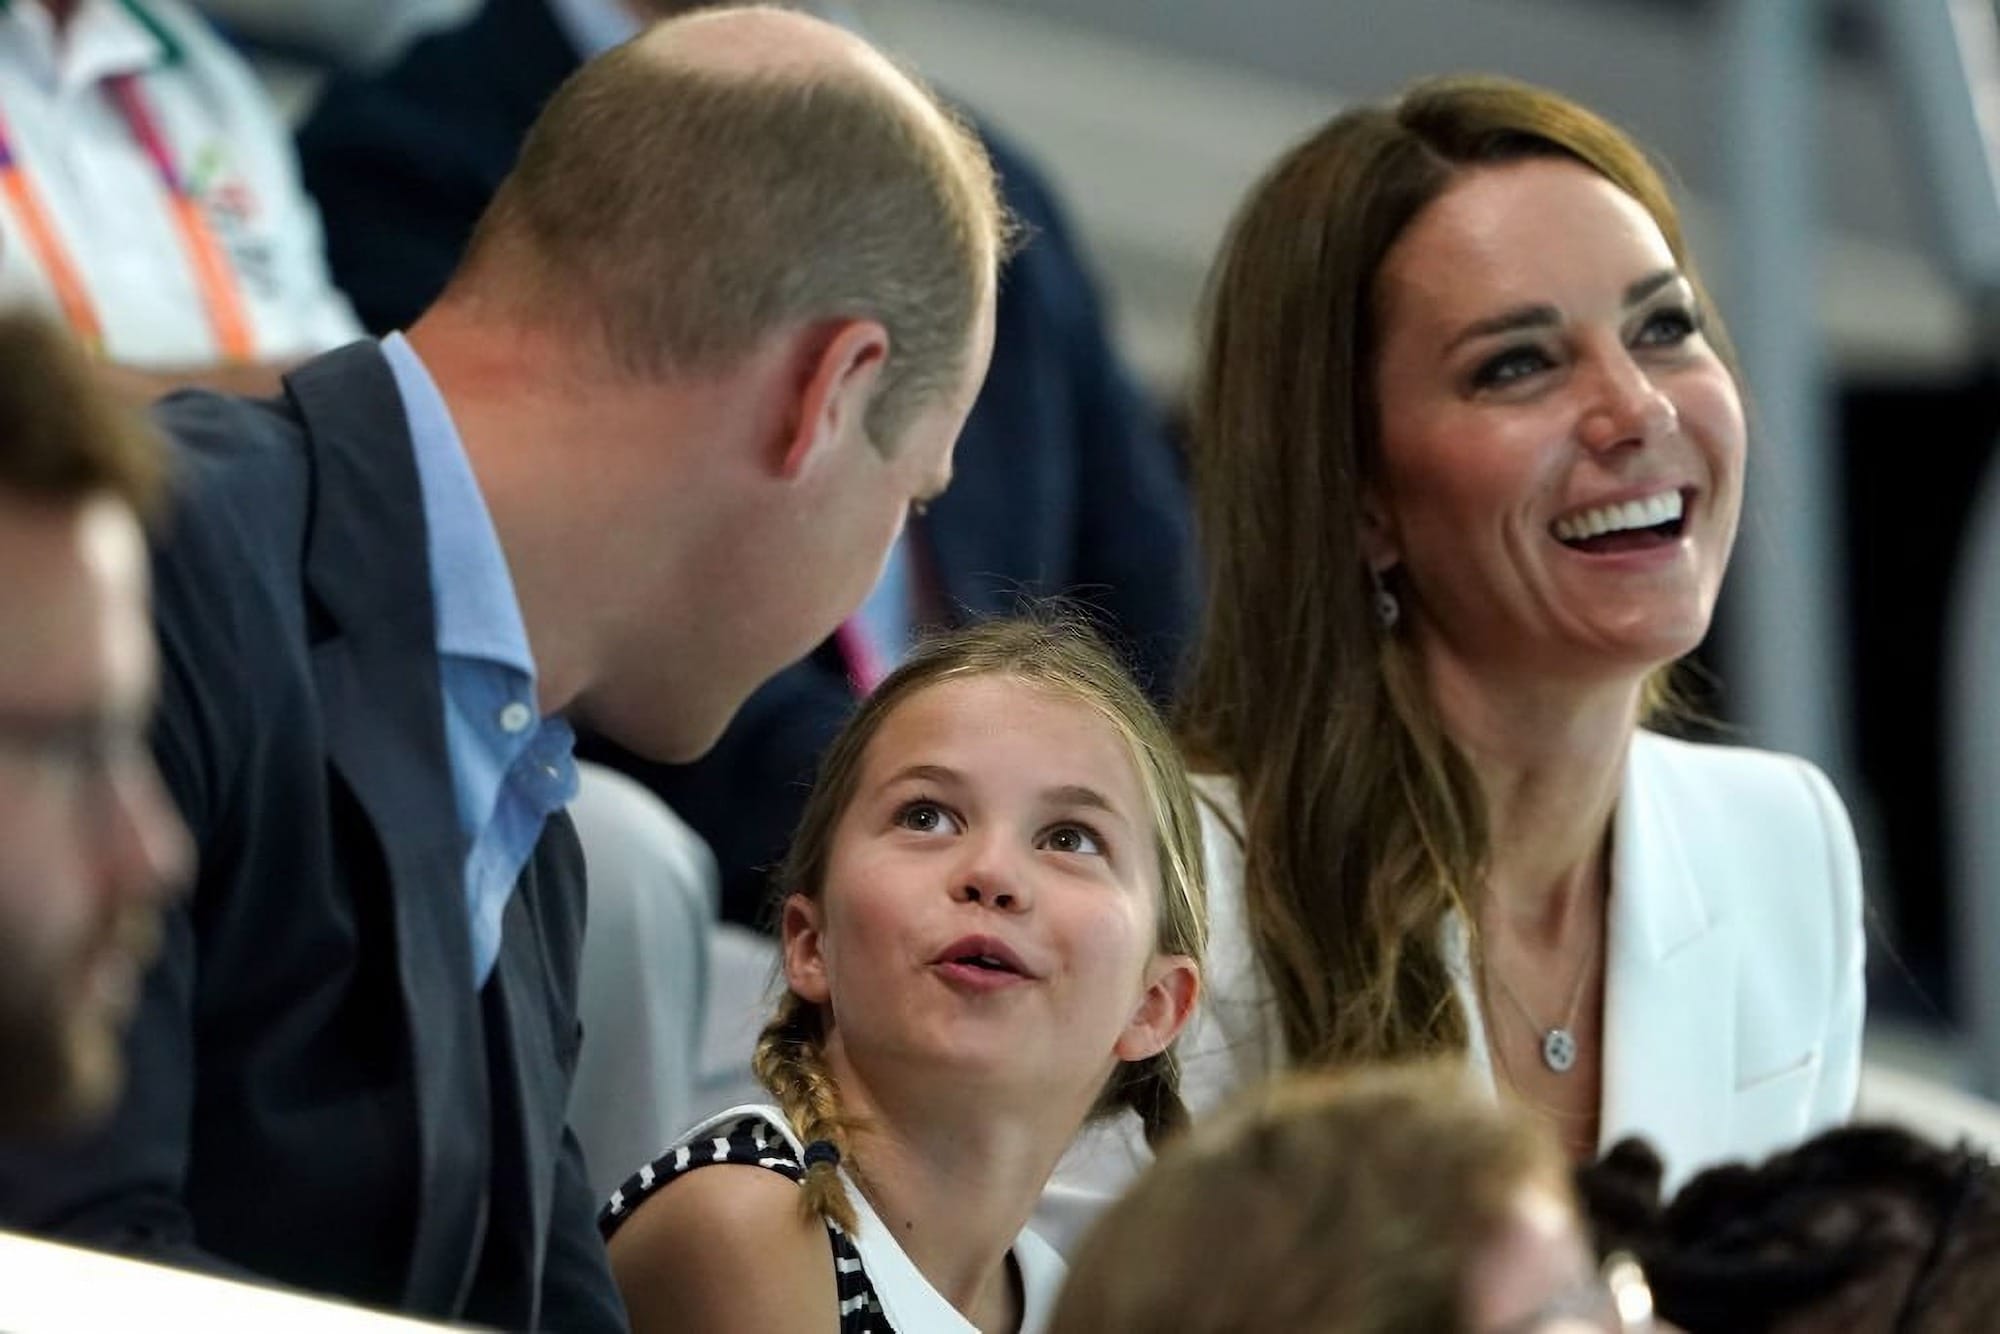 Prince William, Duke of Cambridge and Catherine, Duchess of Cambridge Kate Middleton with their daughter Princess Charlotte of Cambridge at the 2022 Commonwealth Games.